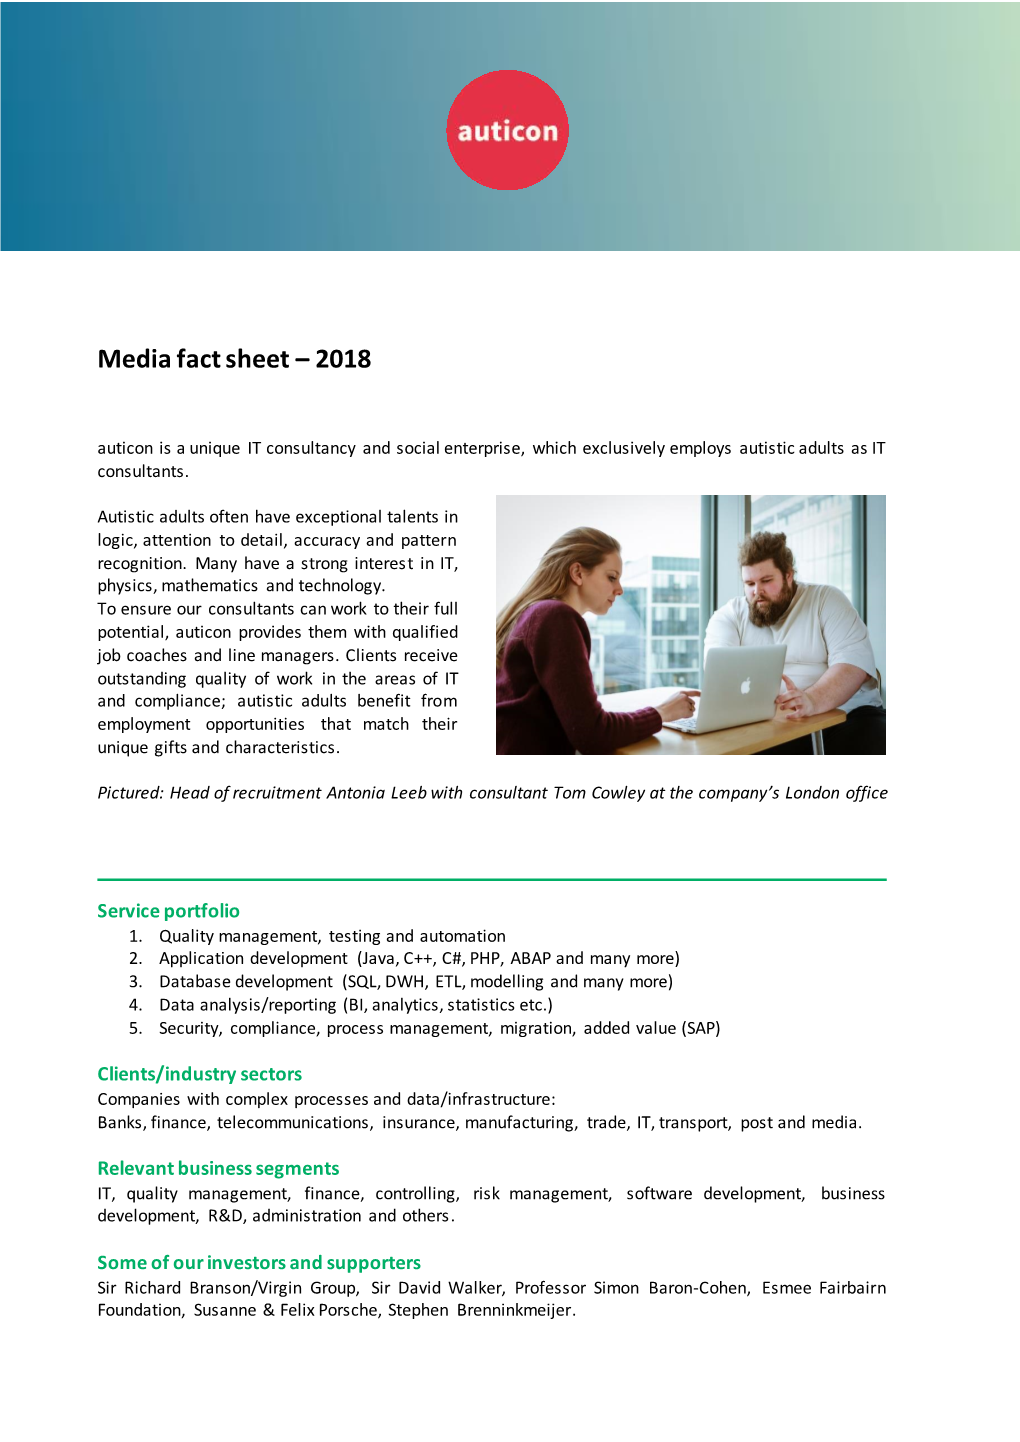 Media Fact Sheet – 2018 Auticon Is a Unique IT Consultancy and Social Enterprise, Which Exclusively Employs Autistic Adults As IT Consultants